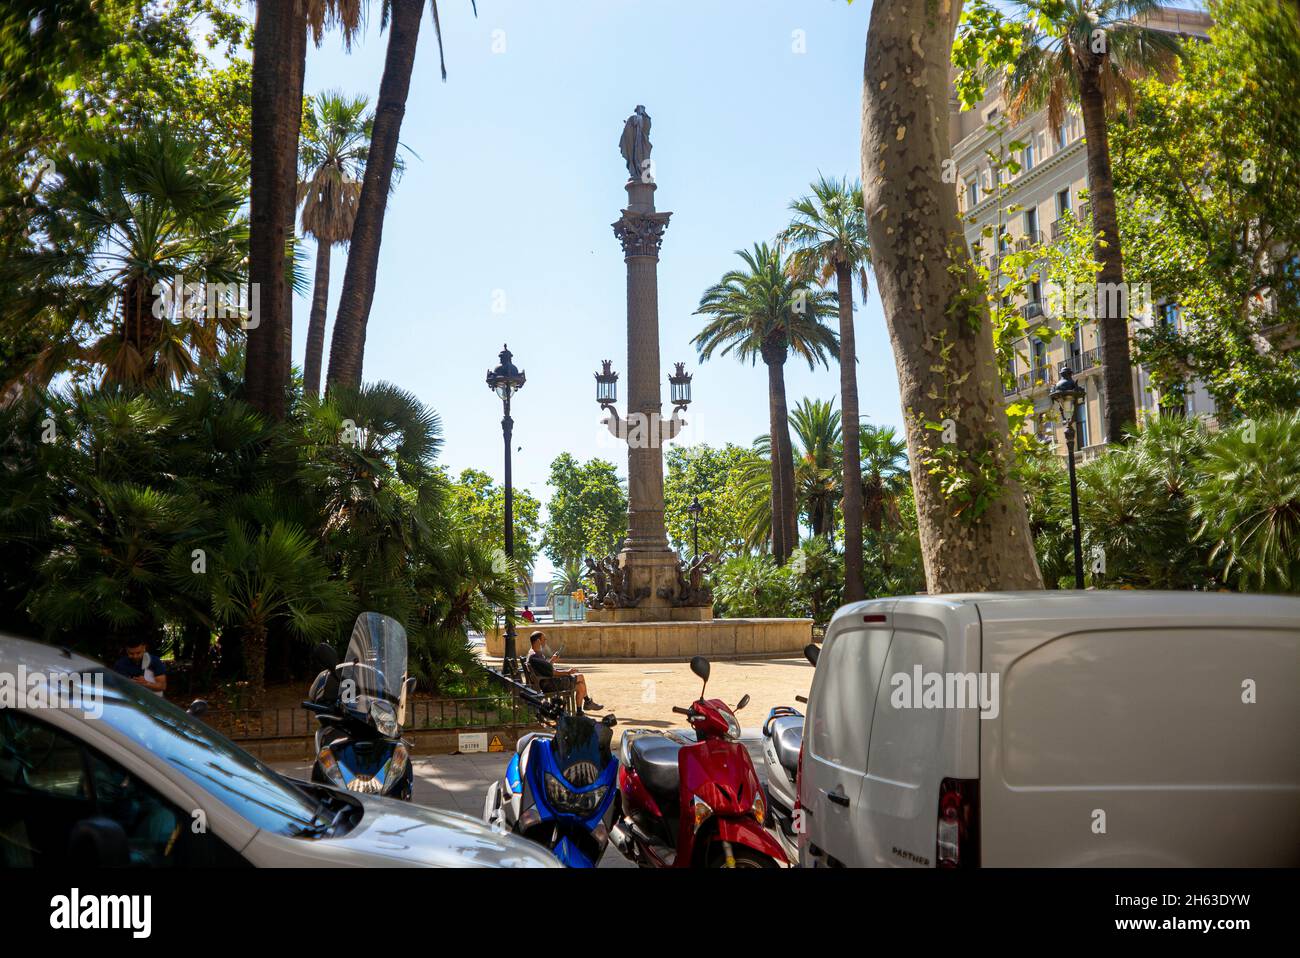 statue at plaça del duc de medinaceli. impressions of barcelona - a city on the coast of northeastern spain. it is the capital and largest city of the autonomous community of catalonia,as well as the second most populous municipality of spain. Stock Photo